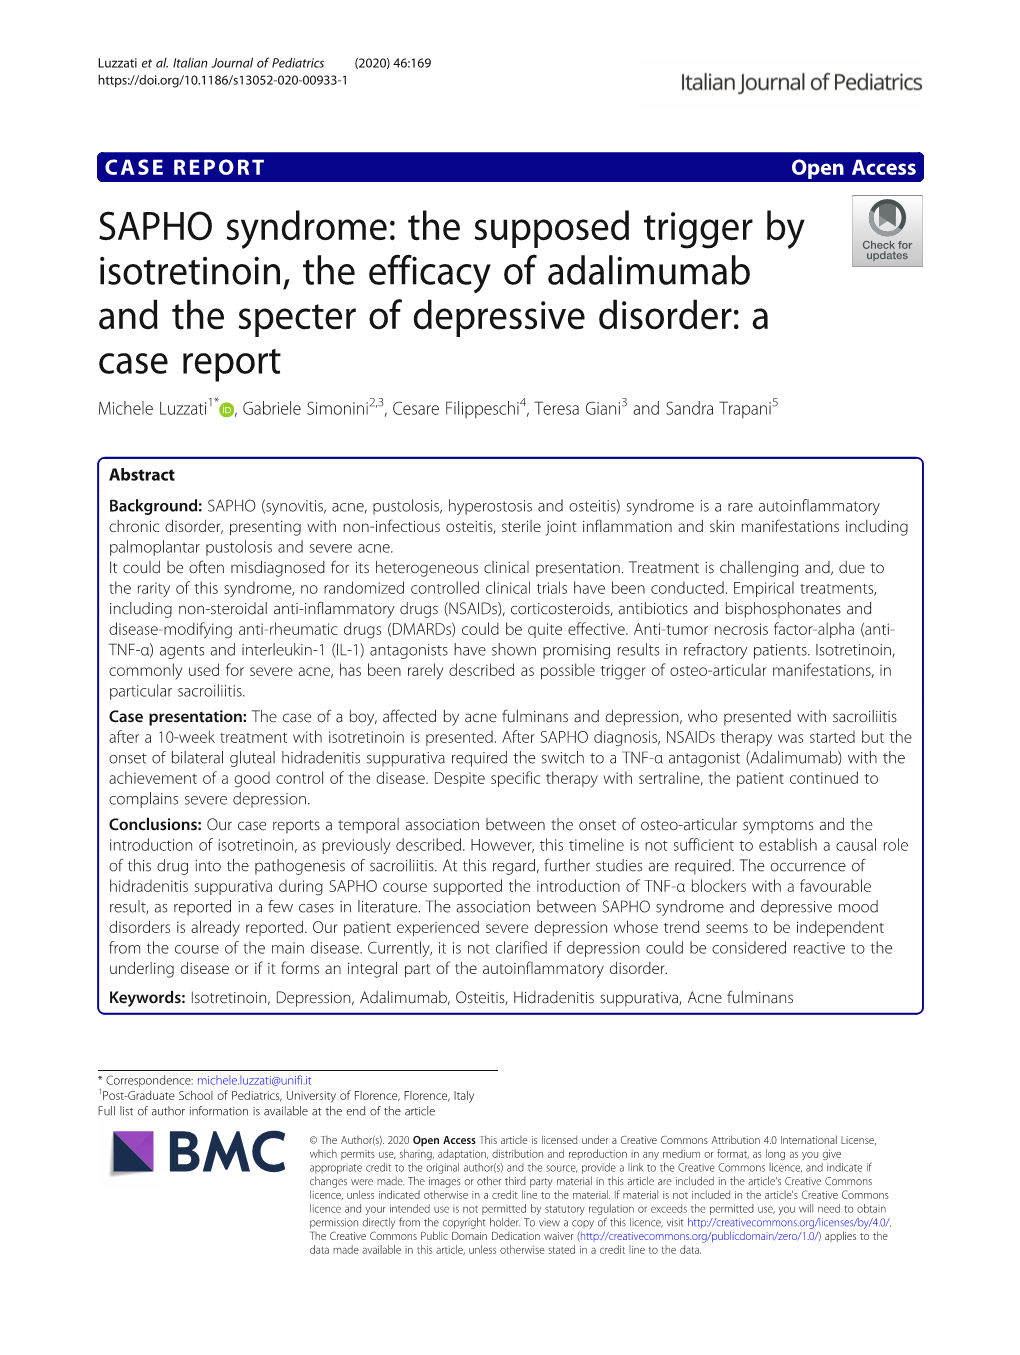 SAPHO Syndrome: the Supposed Trigger by Isotretinoin, the Efficacy Of